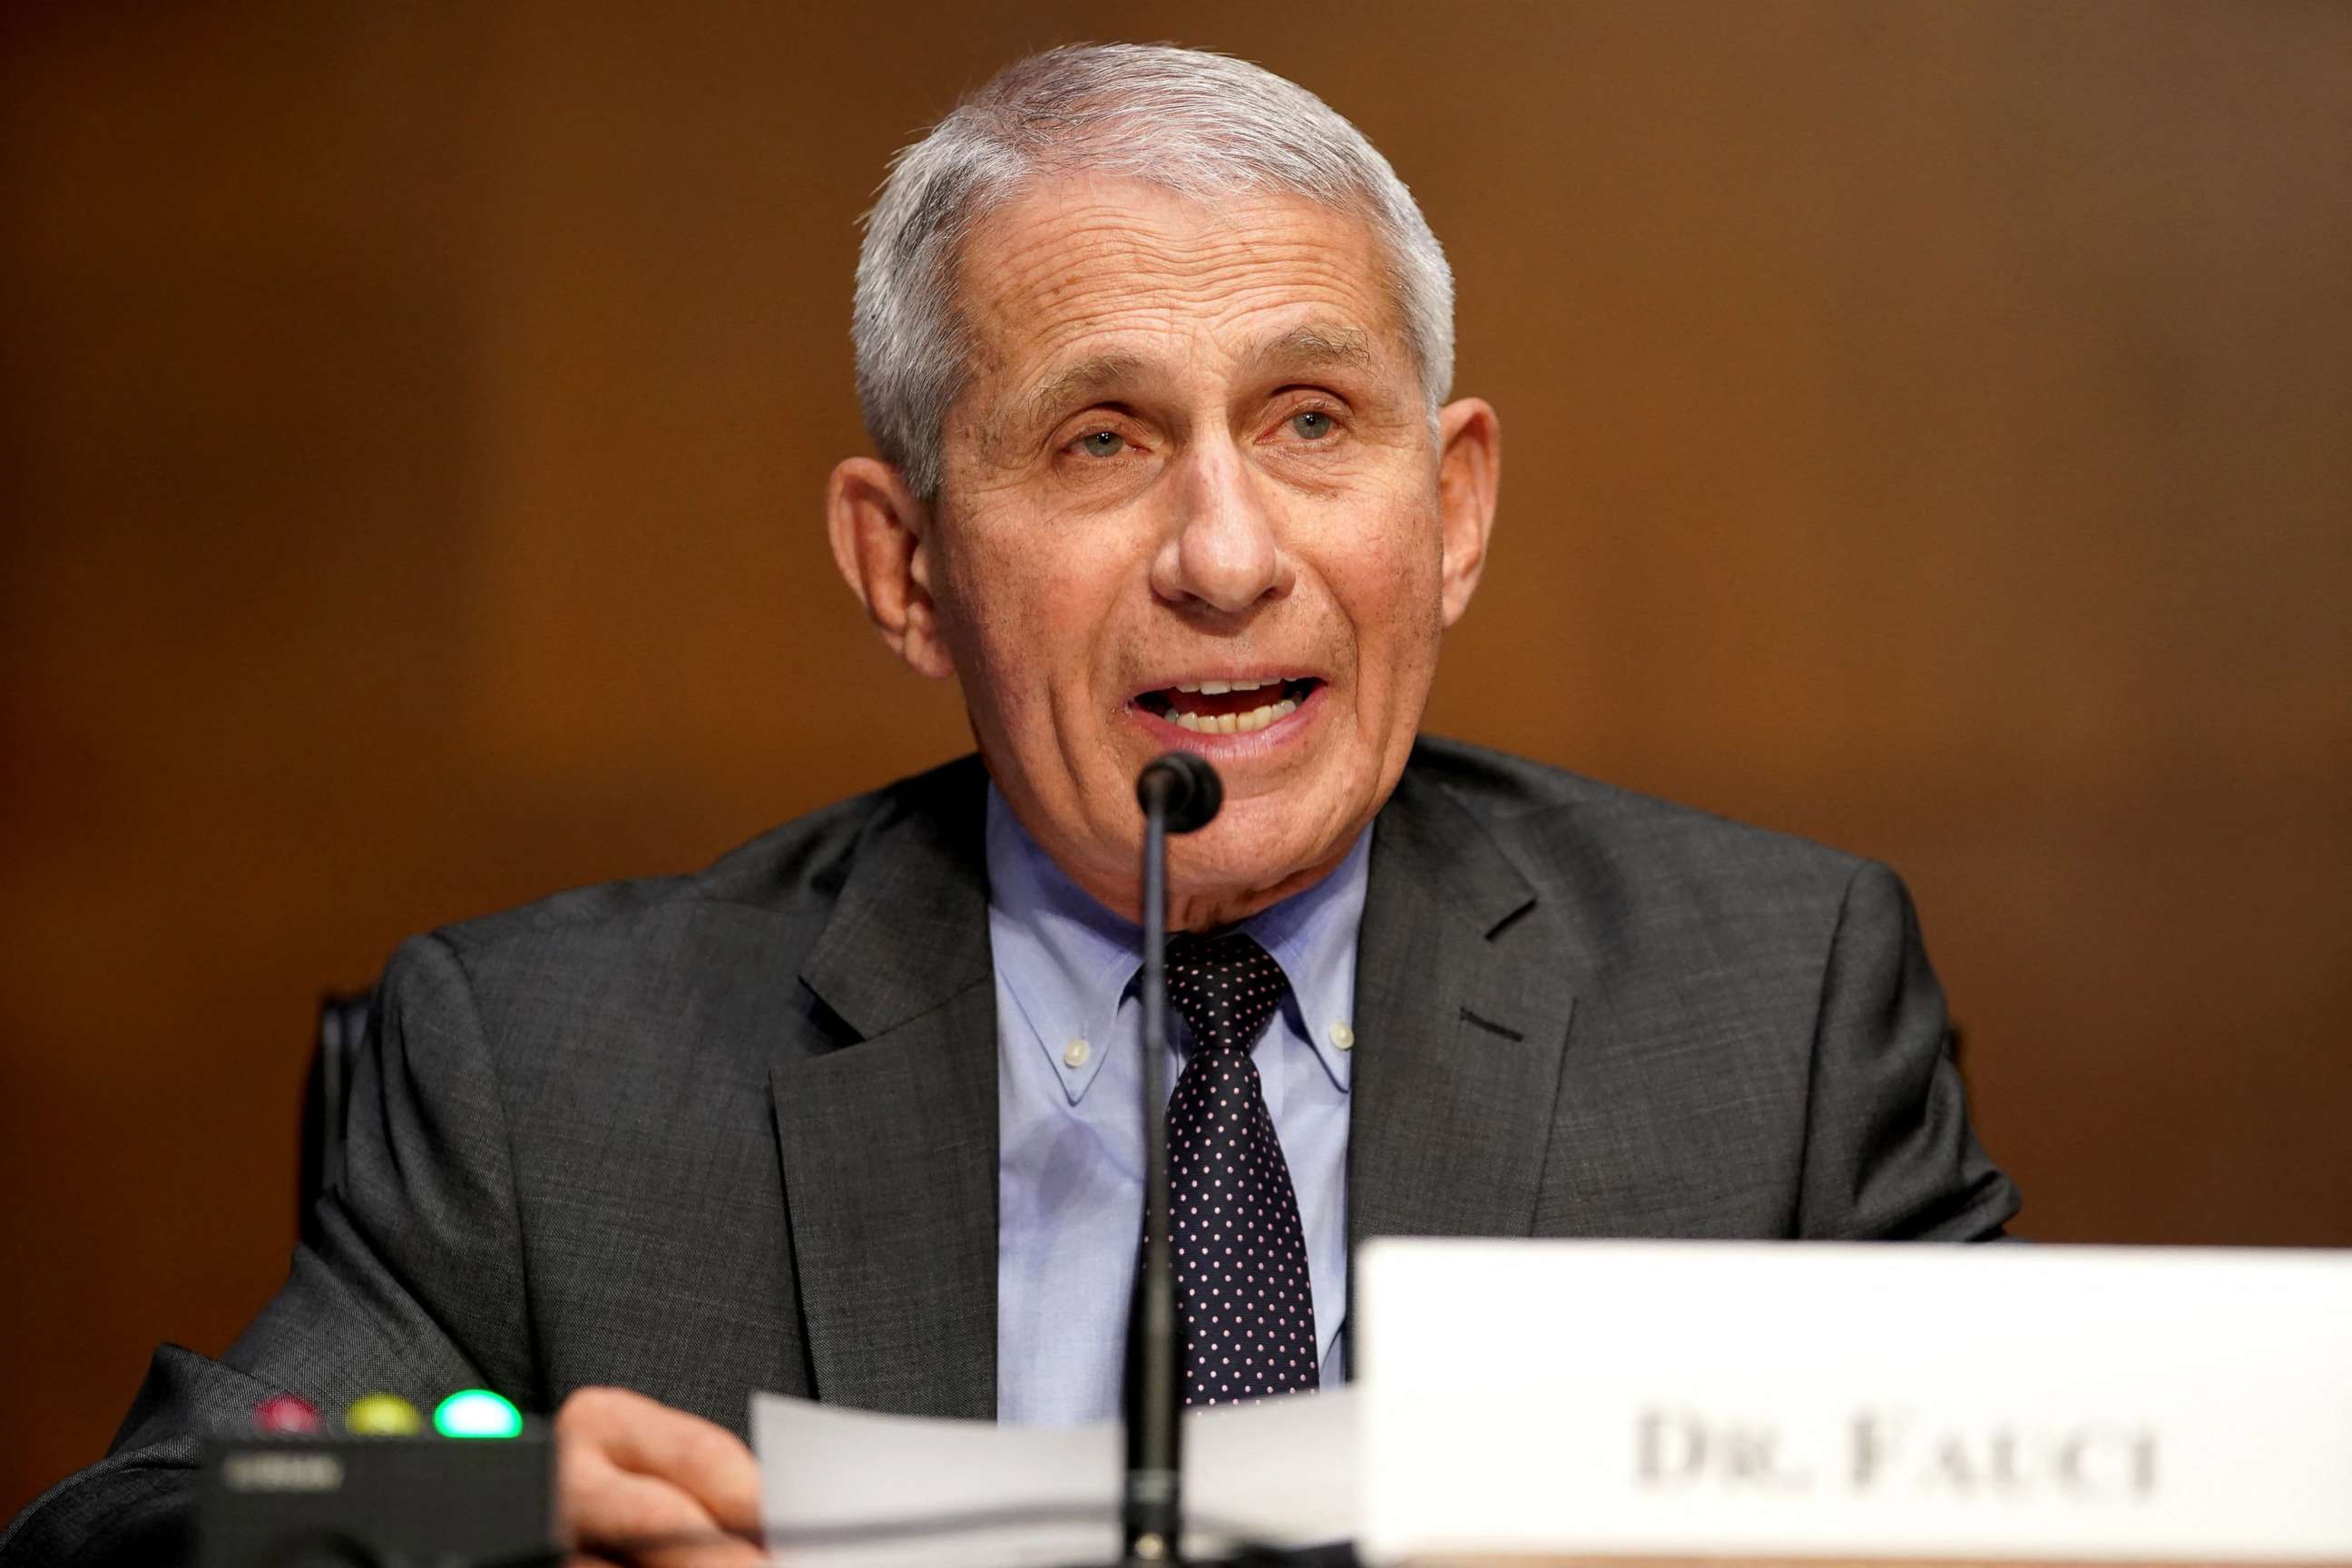 PHOTO: Dr. Anthony Fauci gives an opening statement during a Senate Health, Education, Labor and Pensions Committee hearing to discuss the on-going federal response to Covid-19, May 11, 2021, in Washington, DC.